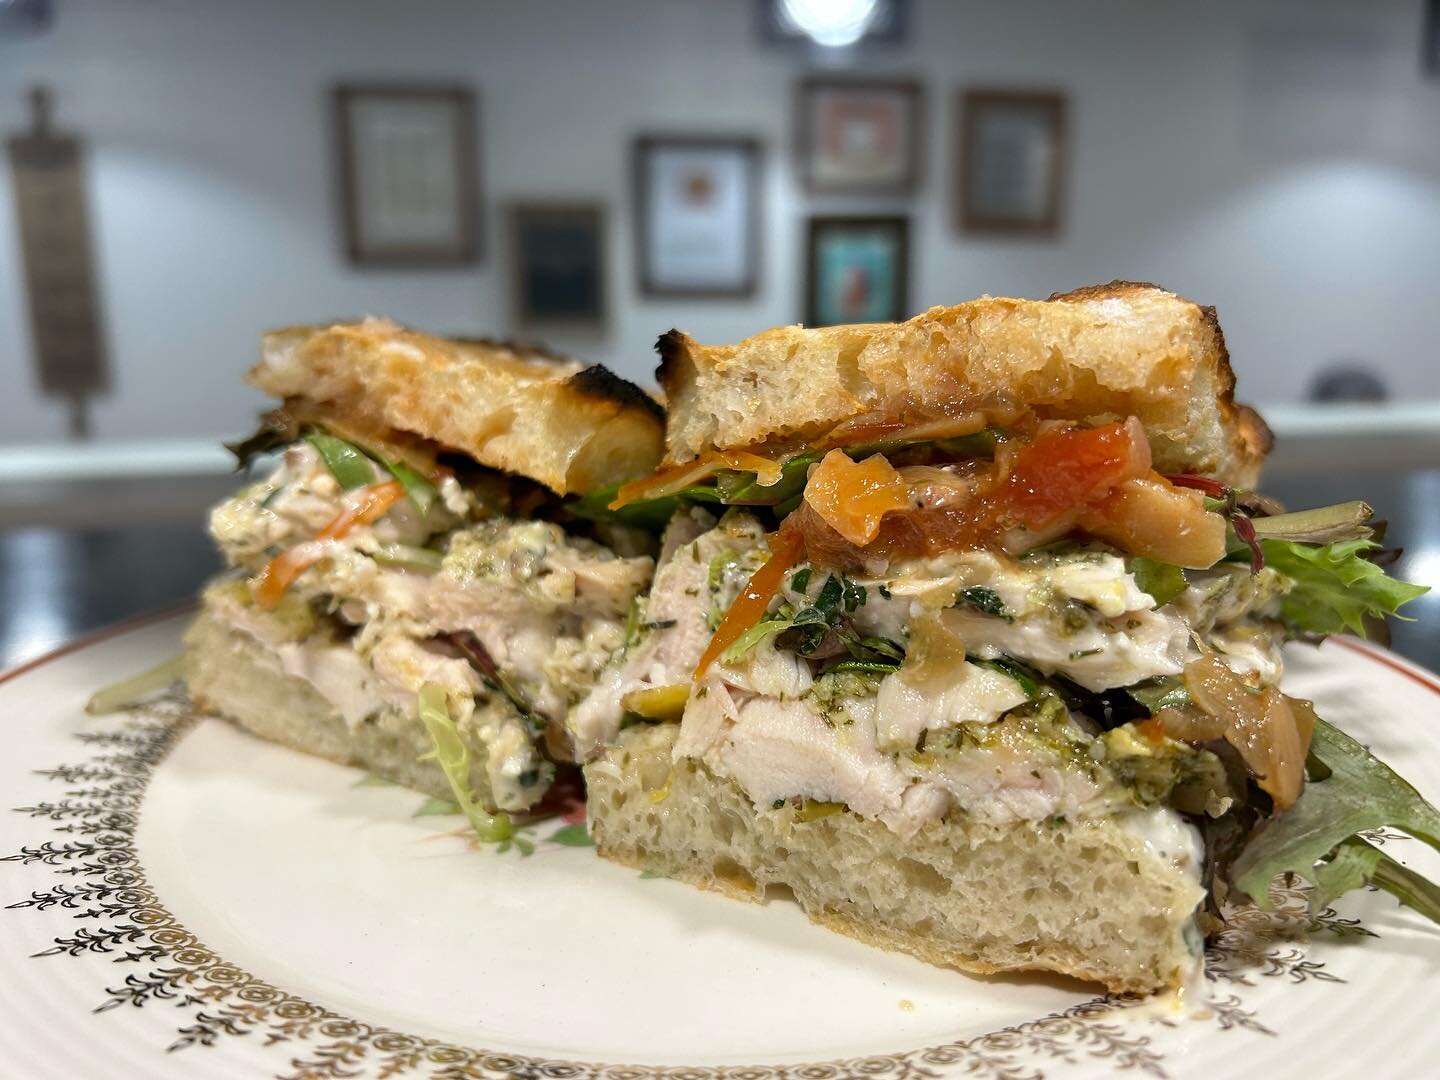 These chickens crossed the road to get dressed up Greek 🐓
On Focaccia we&rsquo;ve got dill and lemon marinated chicken breasts. Topped off with tomato jam, olive and caper tapenade, lemon feta aioli and some greens. 
 Today and Tomorrow while suppli